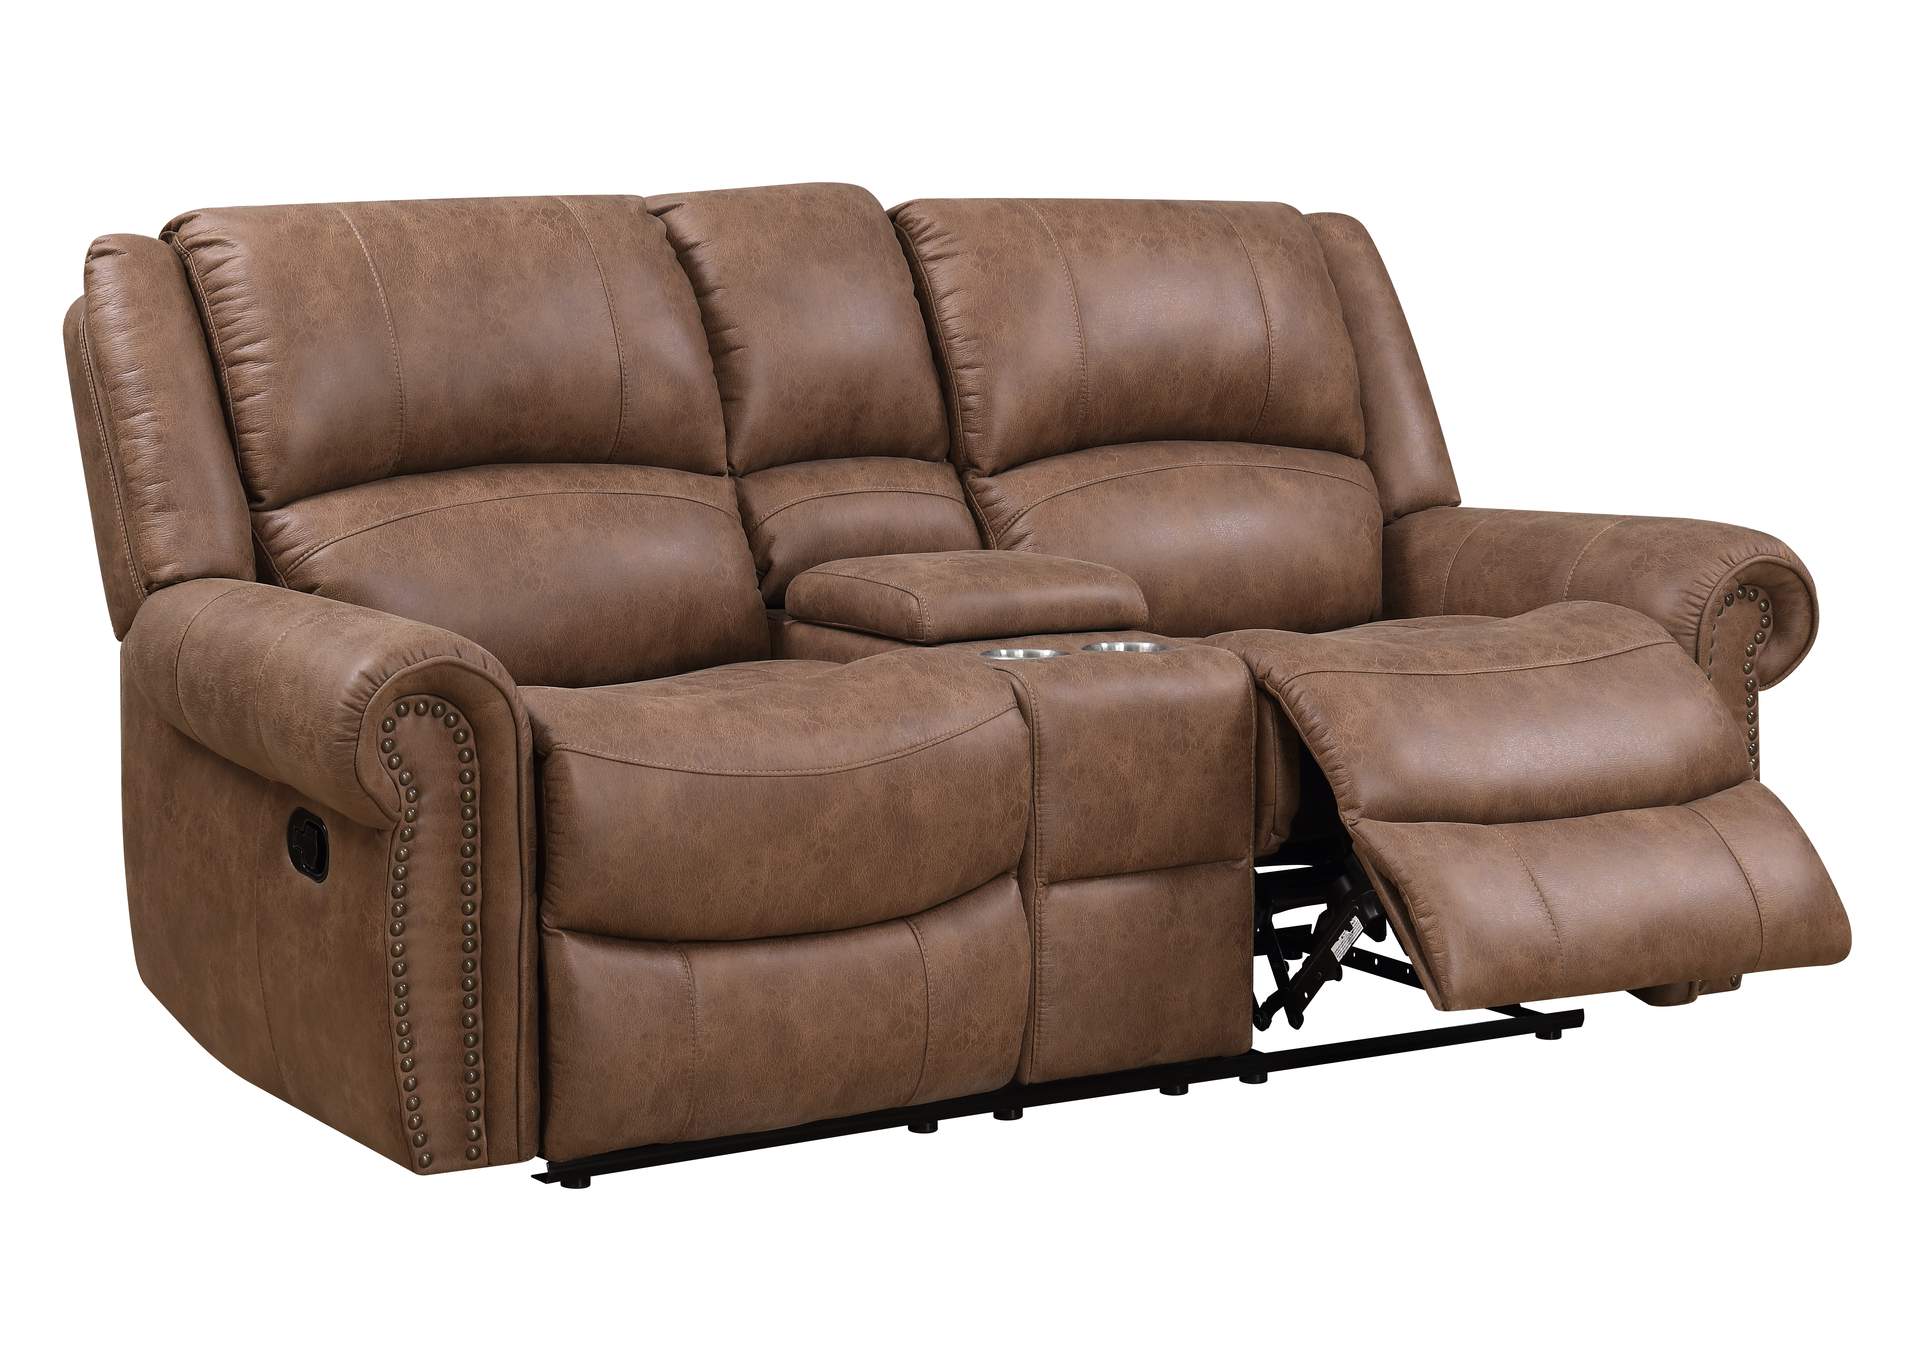 Spencer Reclining Console Loveseat,Emerald Home Furnishings